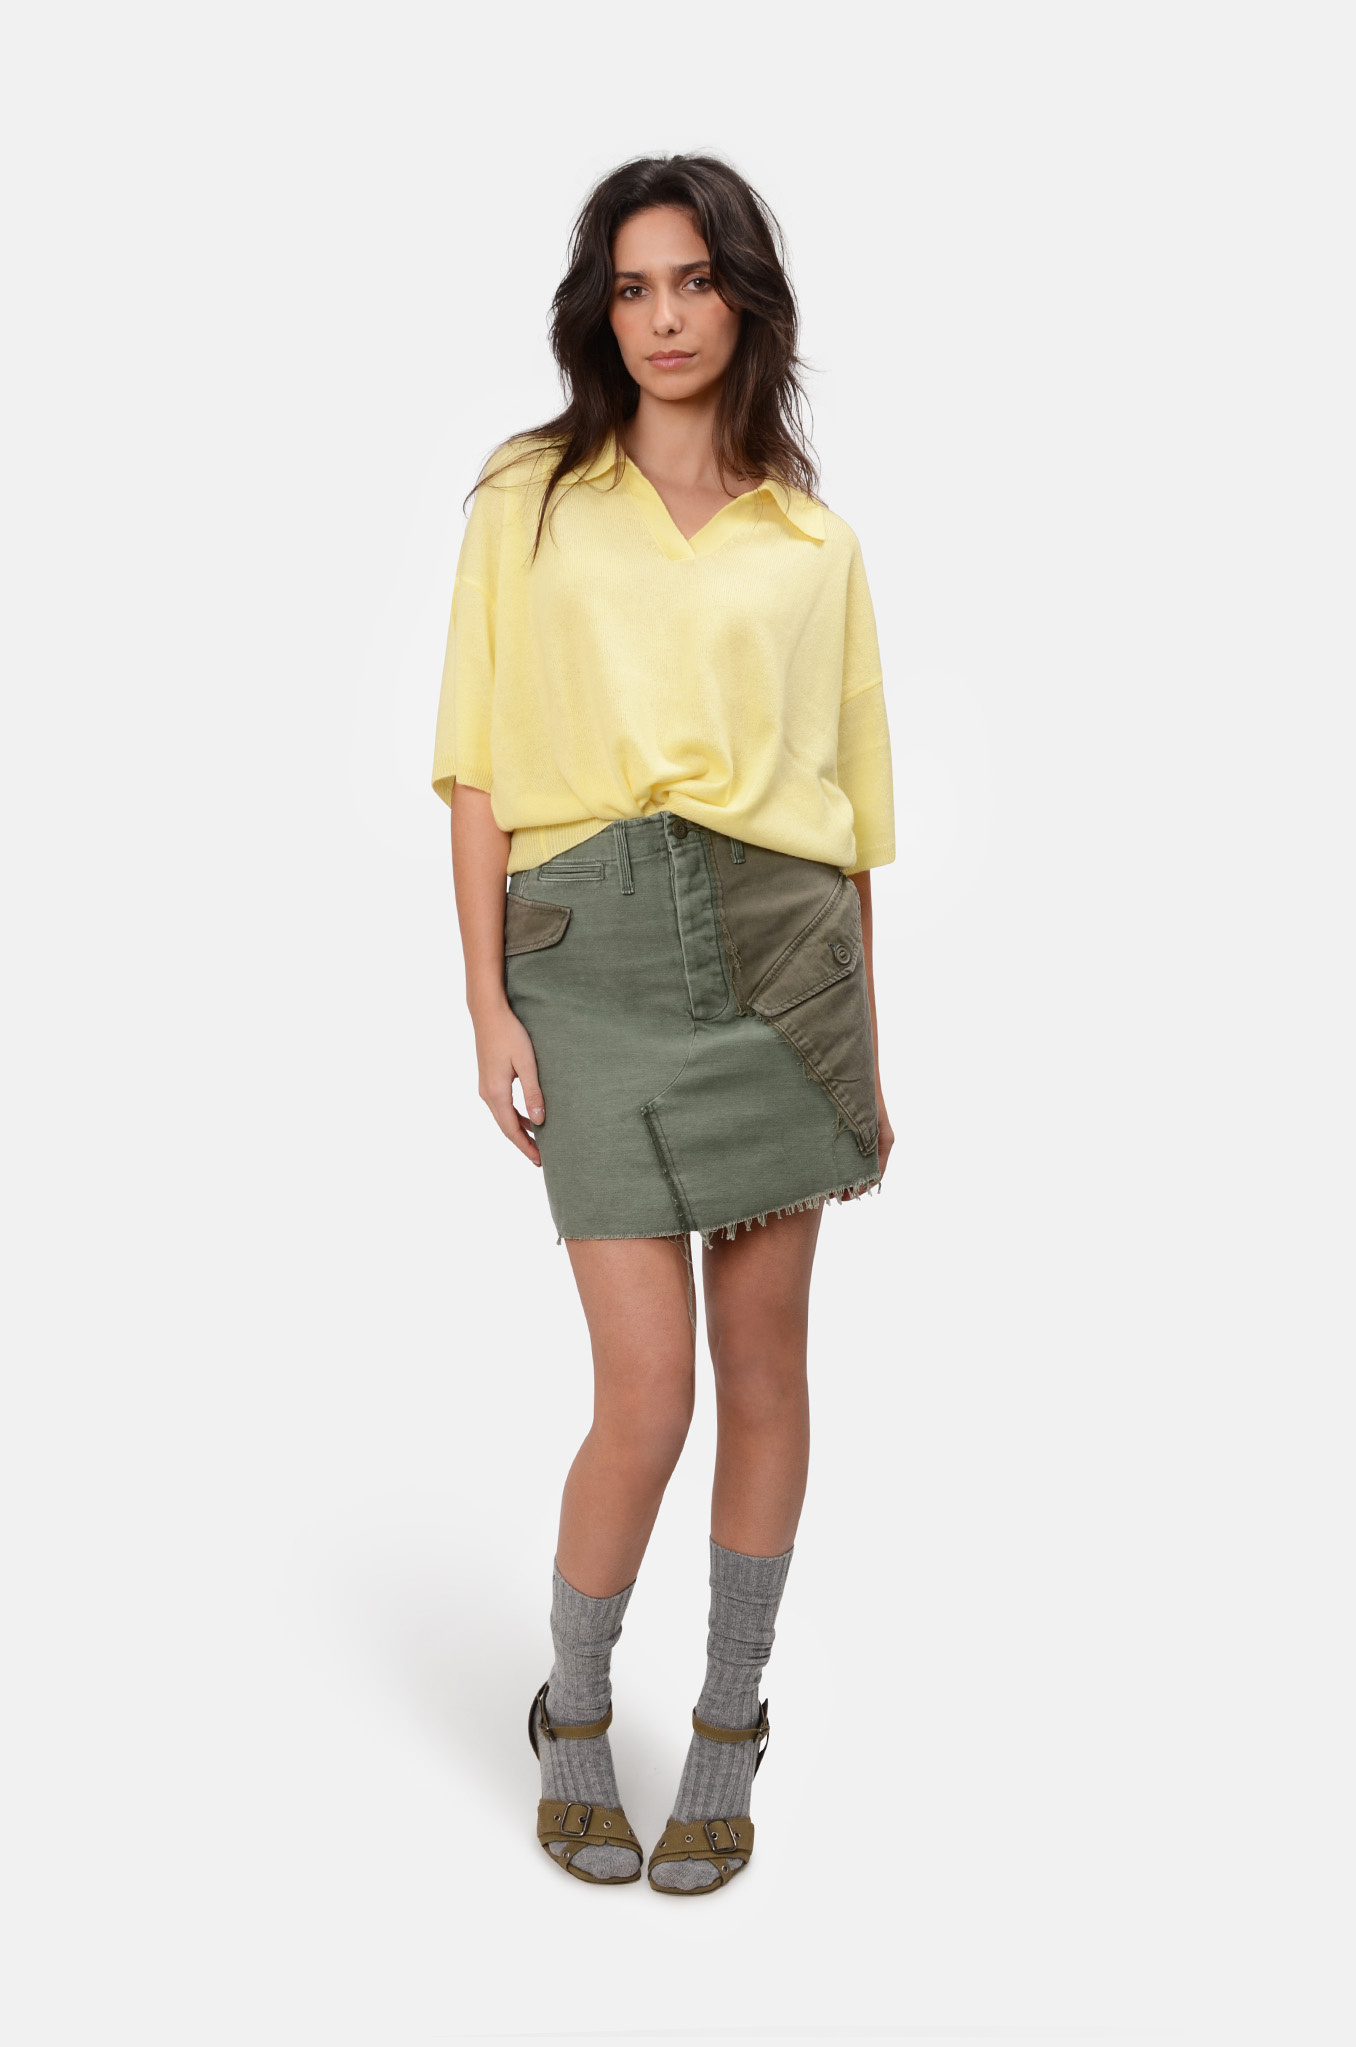 The G.I.Jane Mini Skirt in On The Double-2